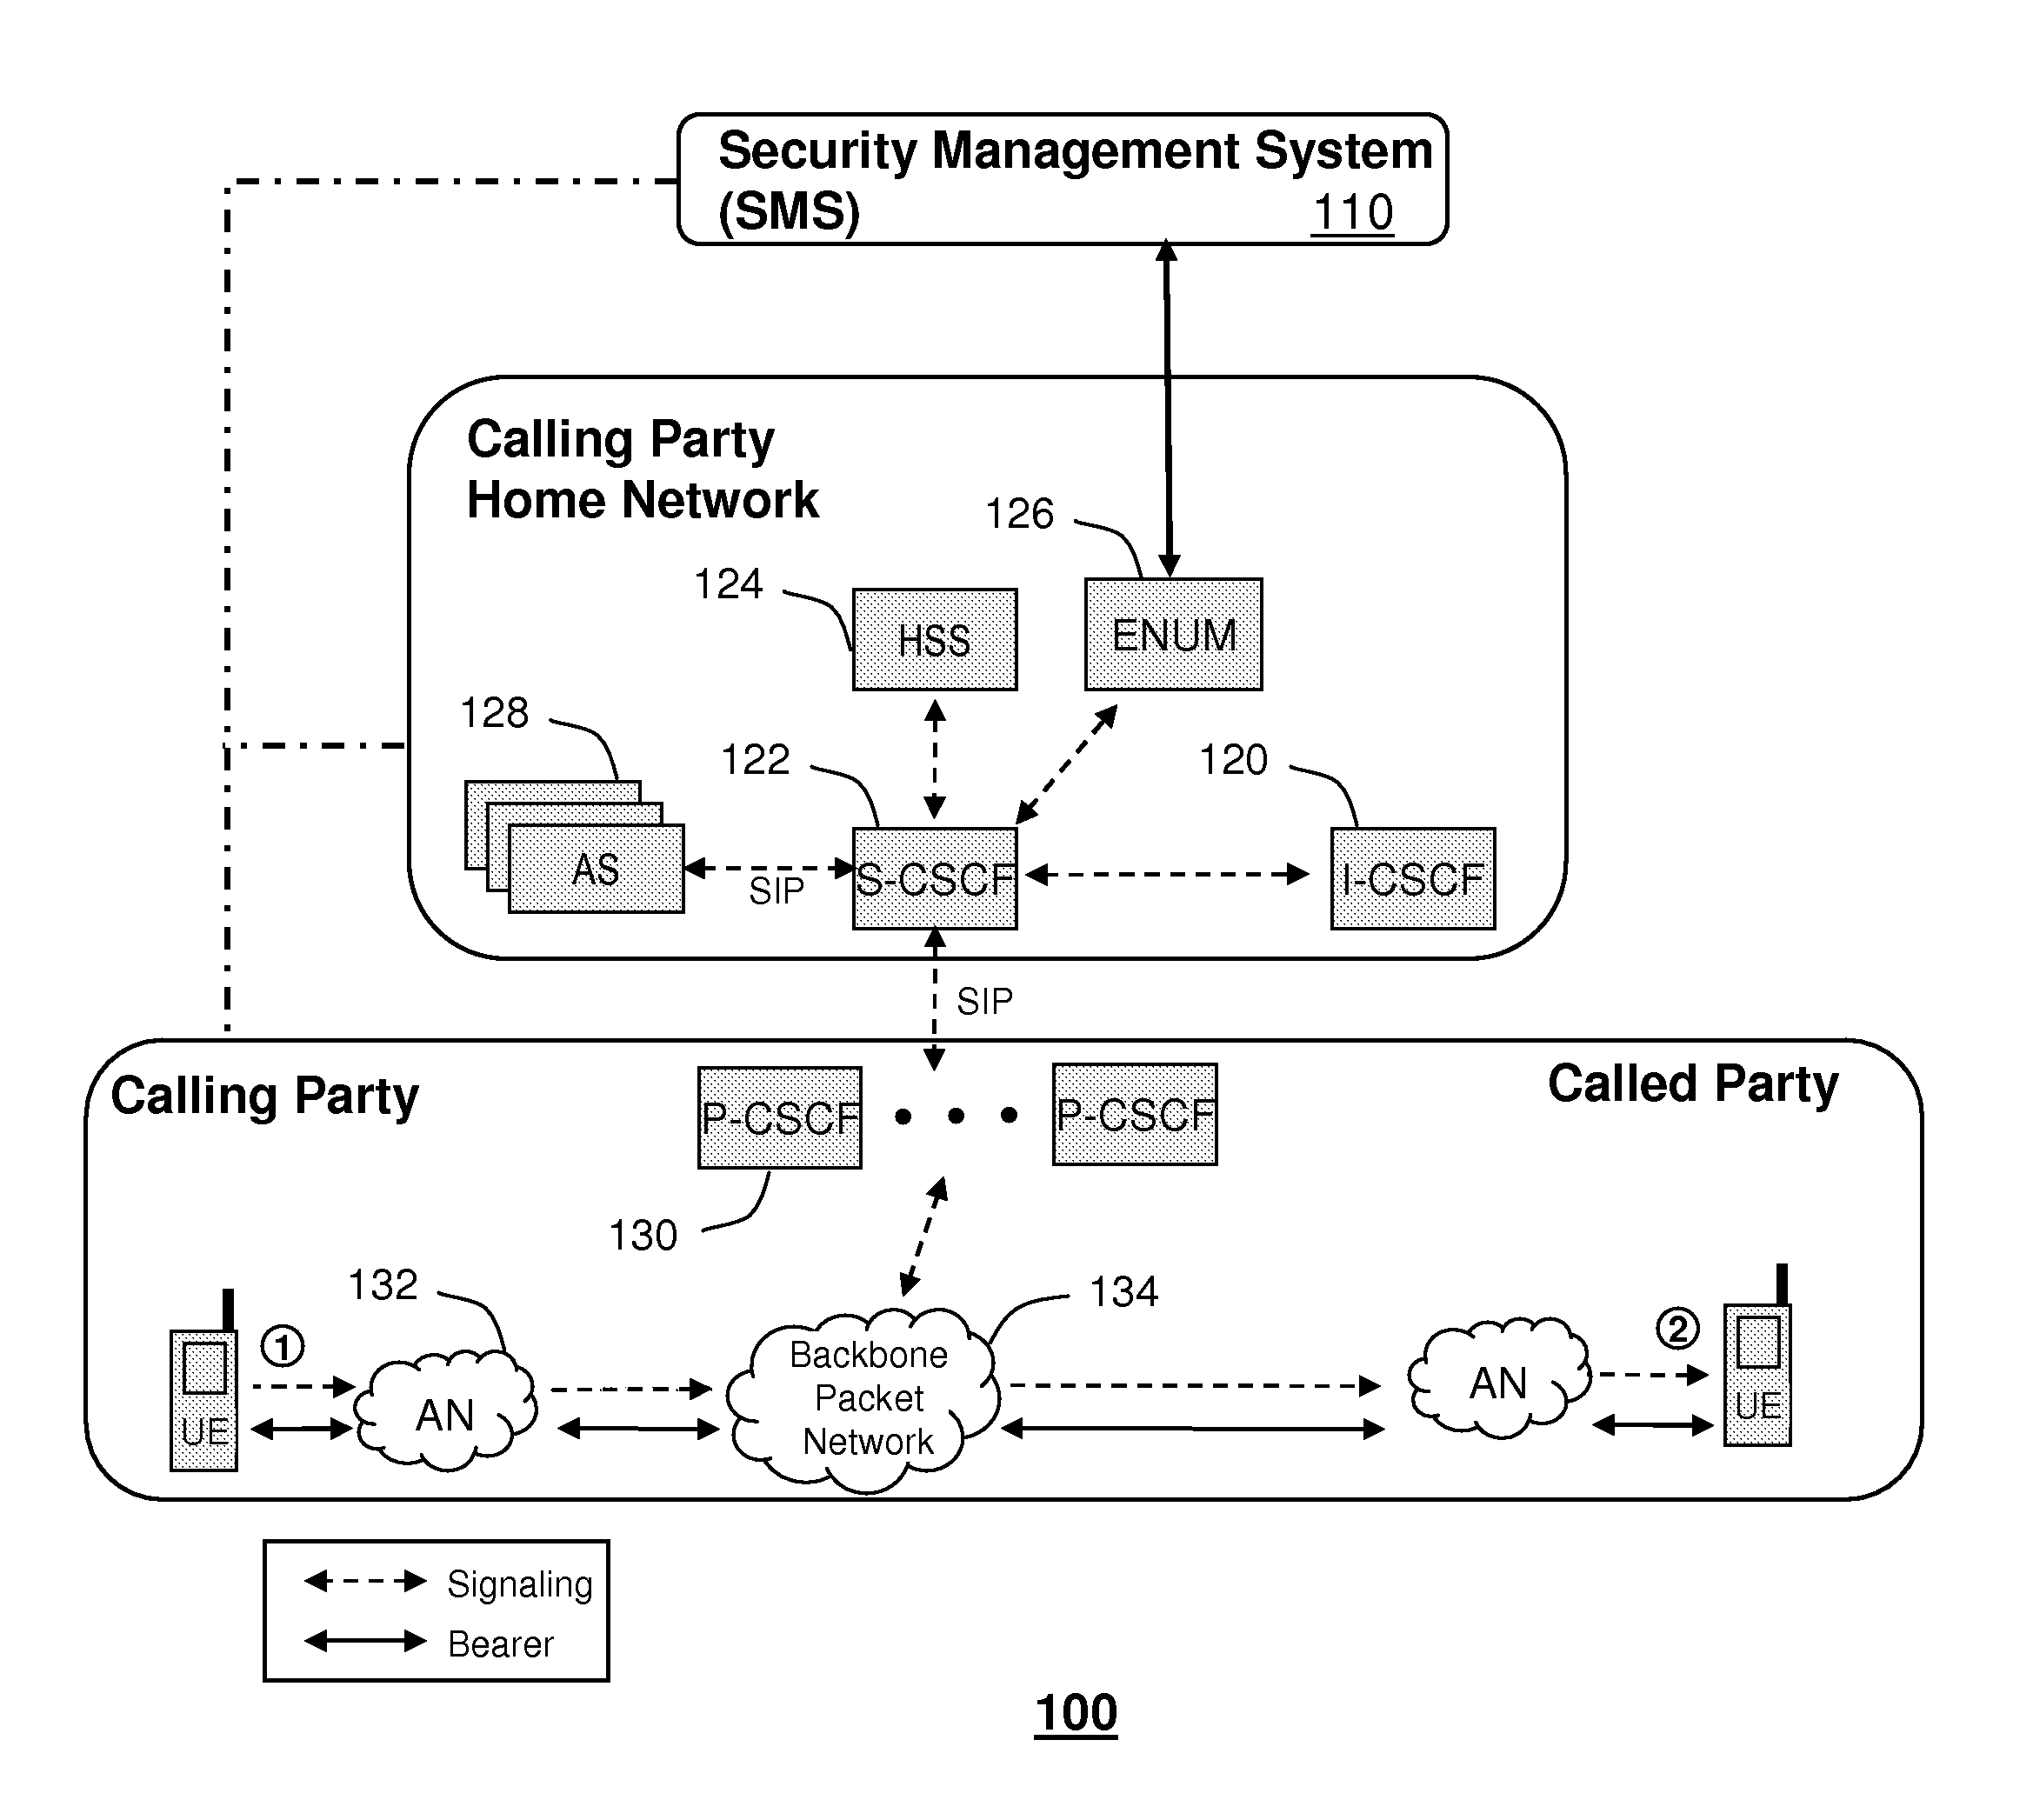 System for monitoring operations of an ENUM system